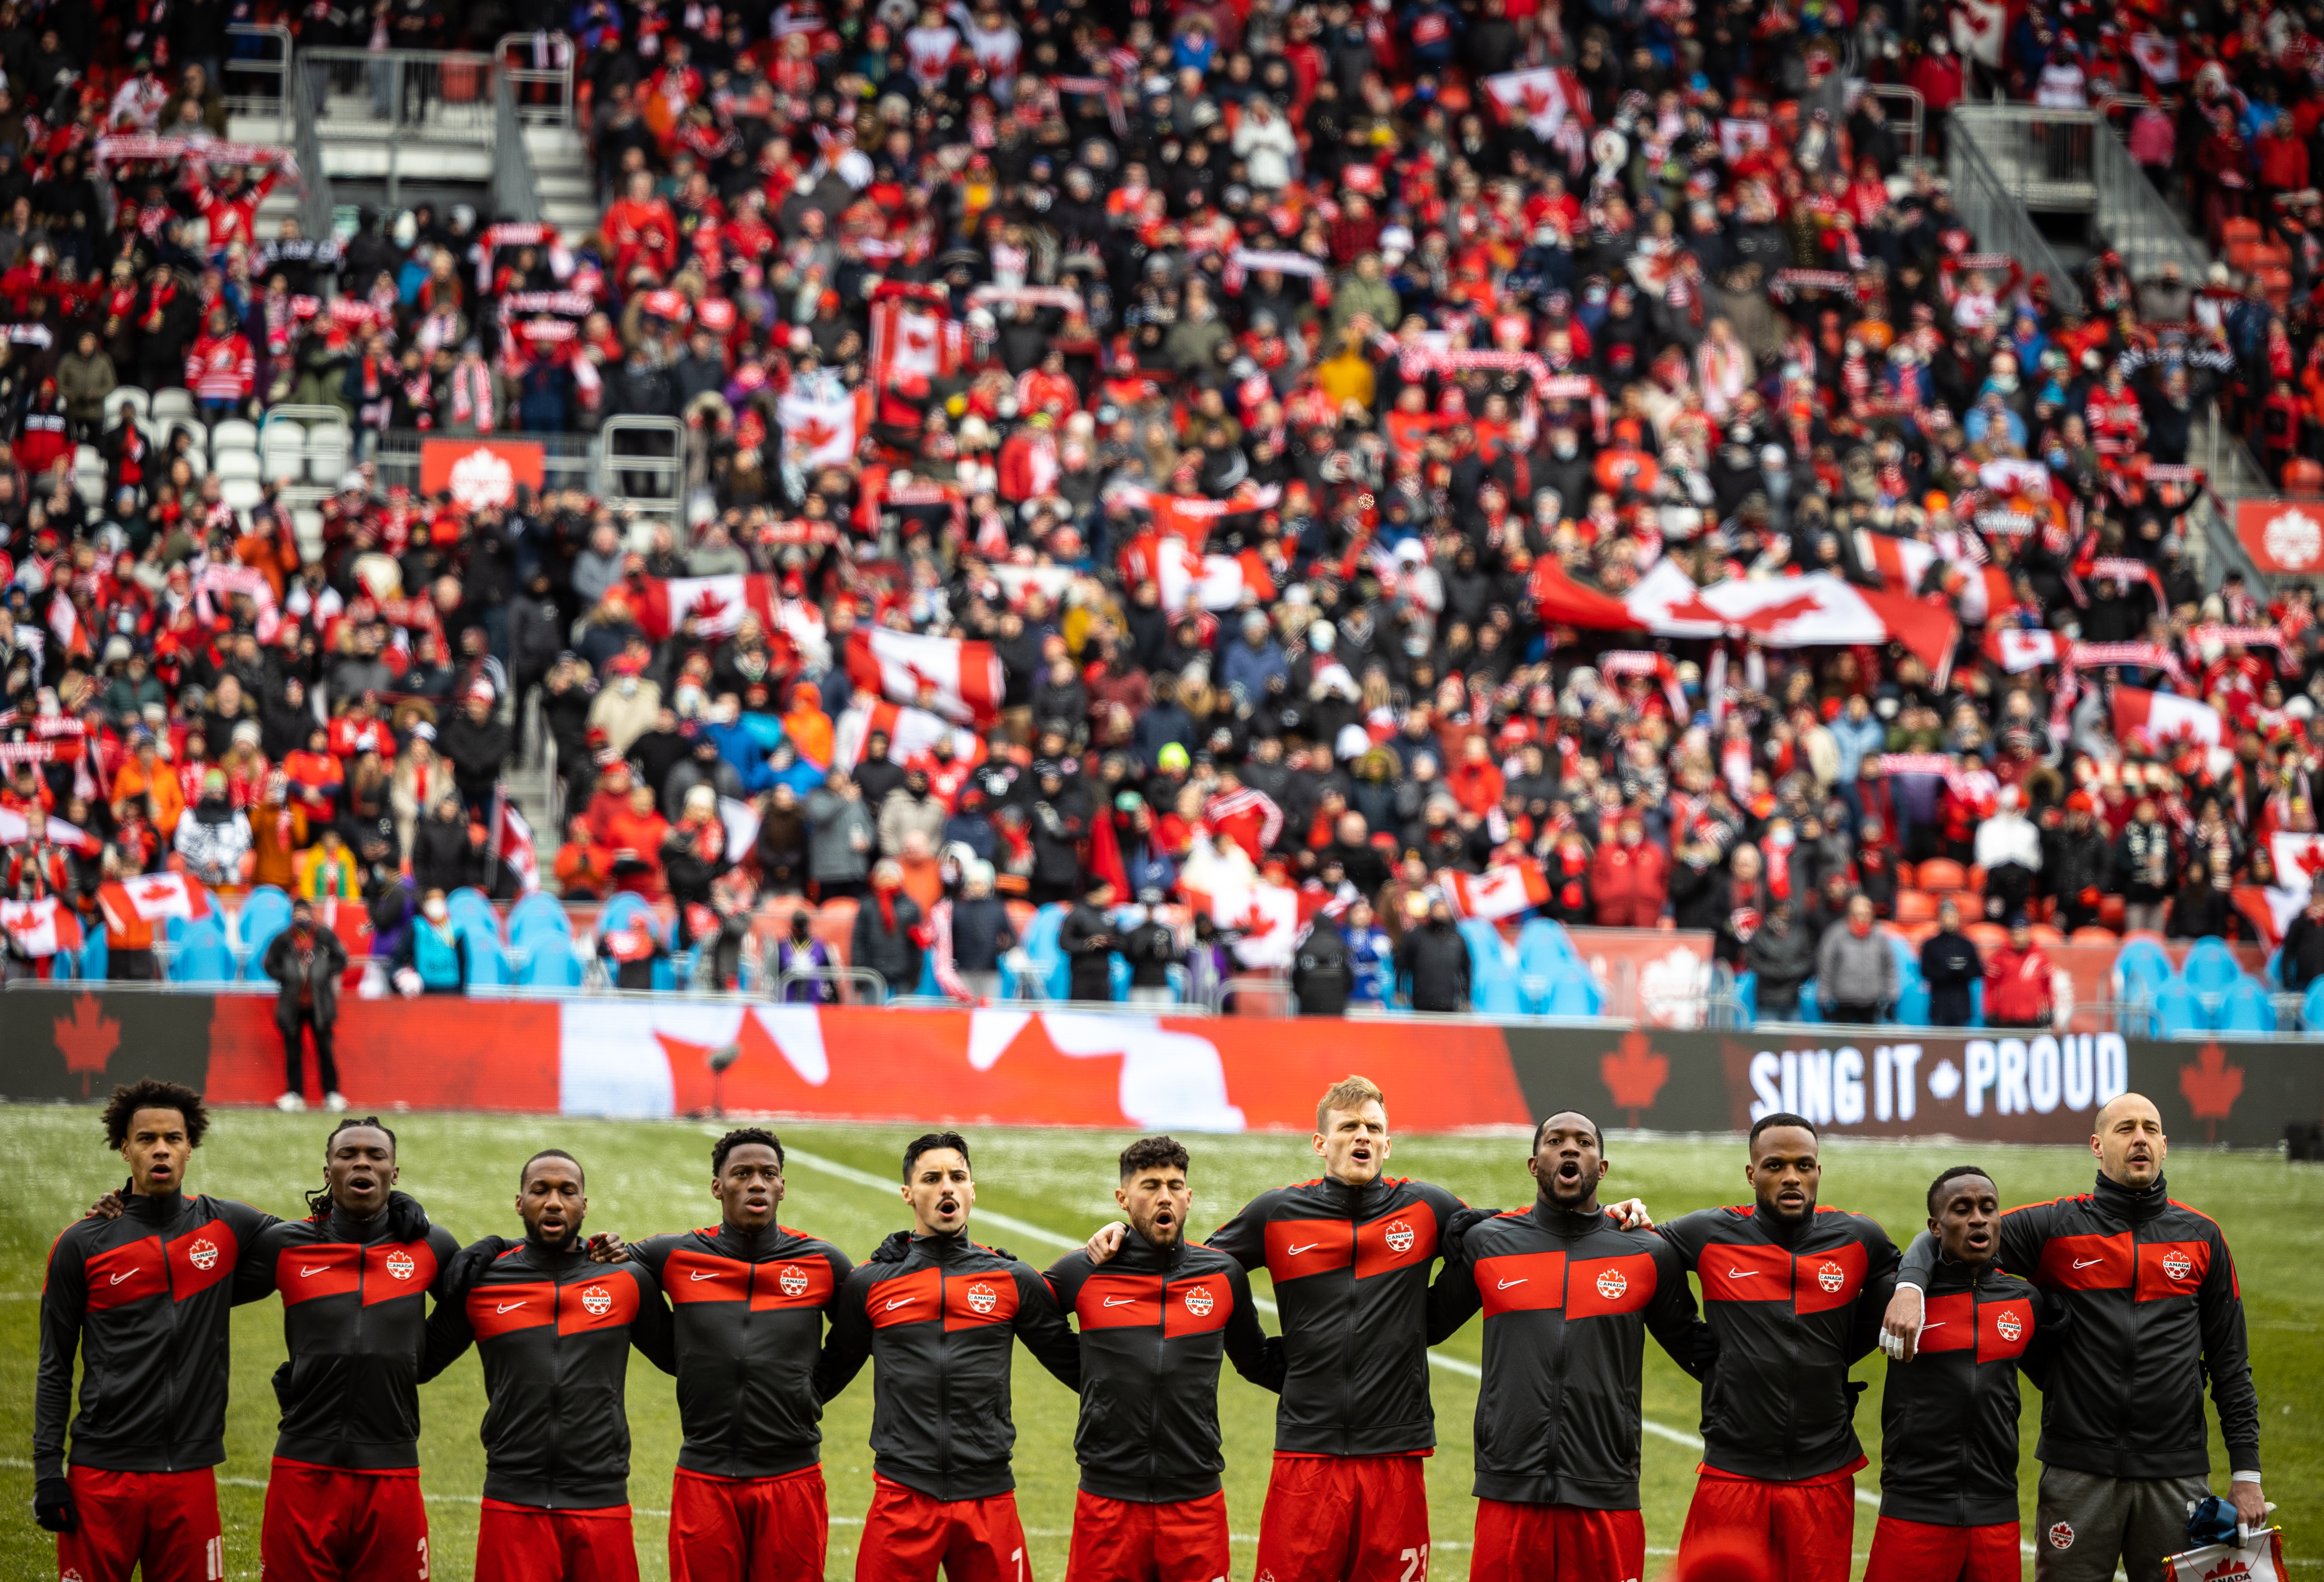 Canada National Soccer Team Wallpapers